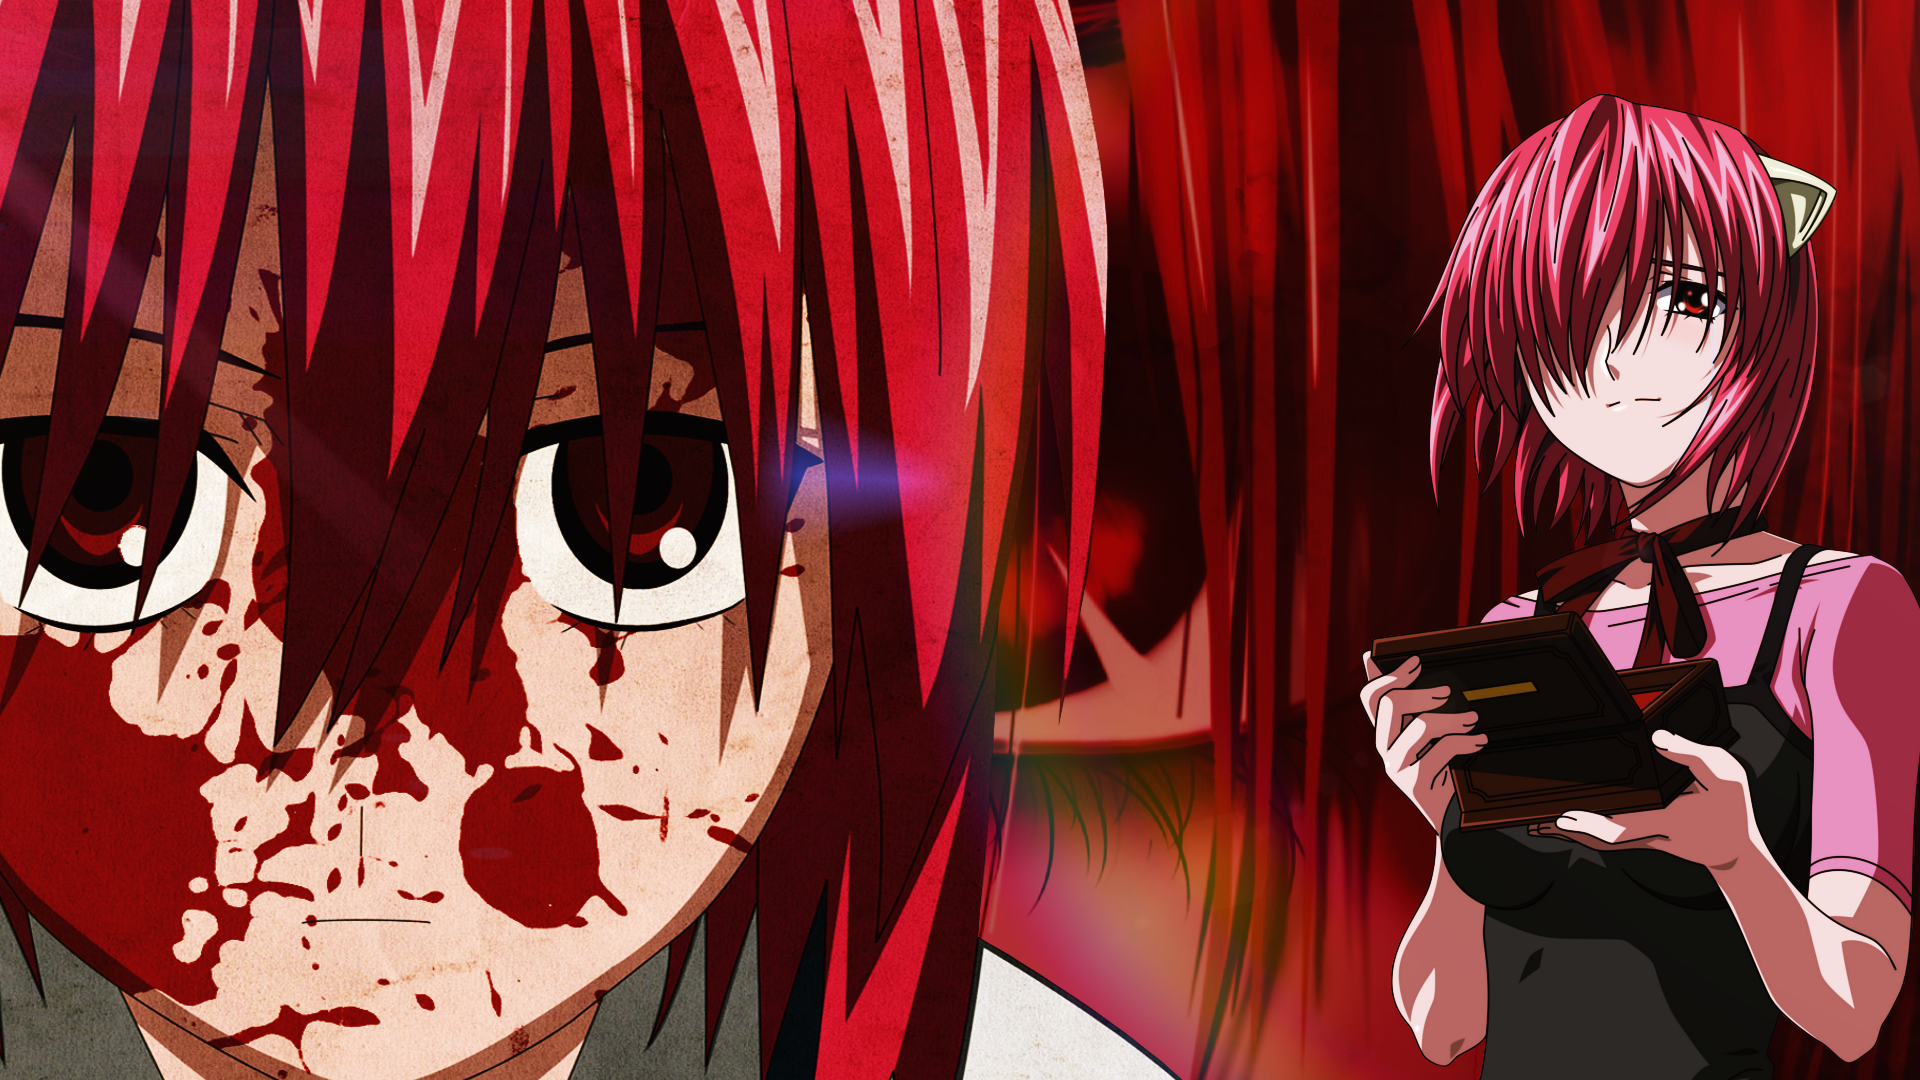 Free Download Wallpapers From The Anime Elfen Lied I Didnt Make These Wallpapers X For